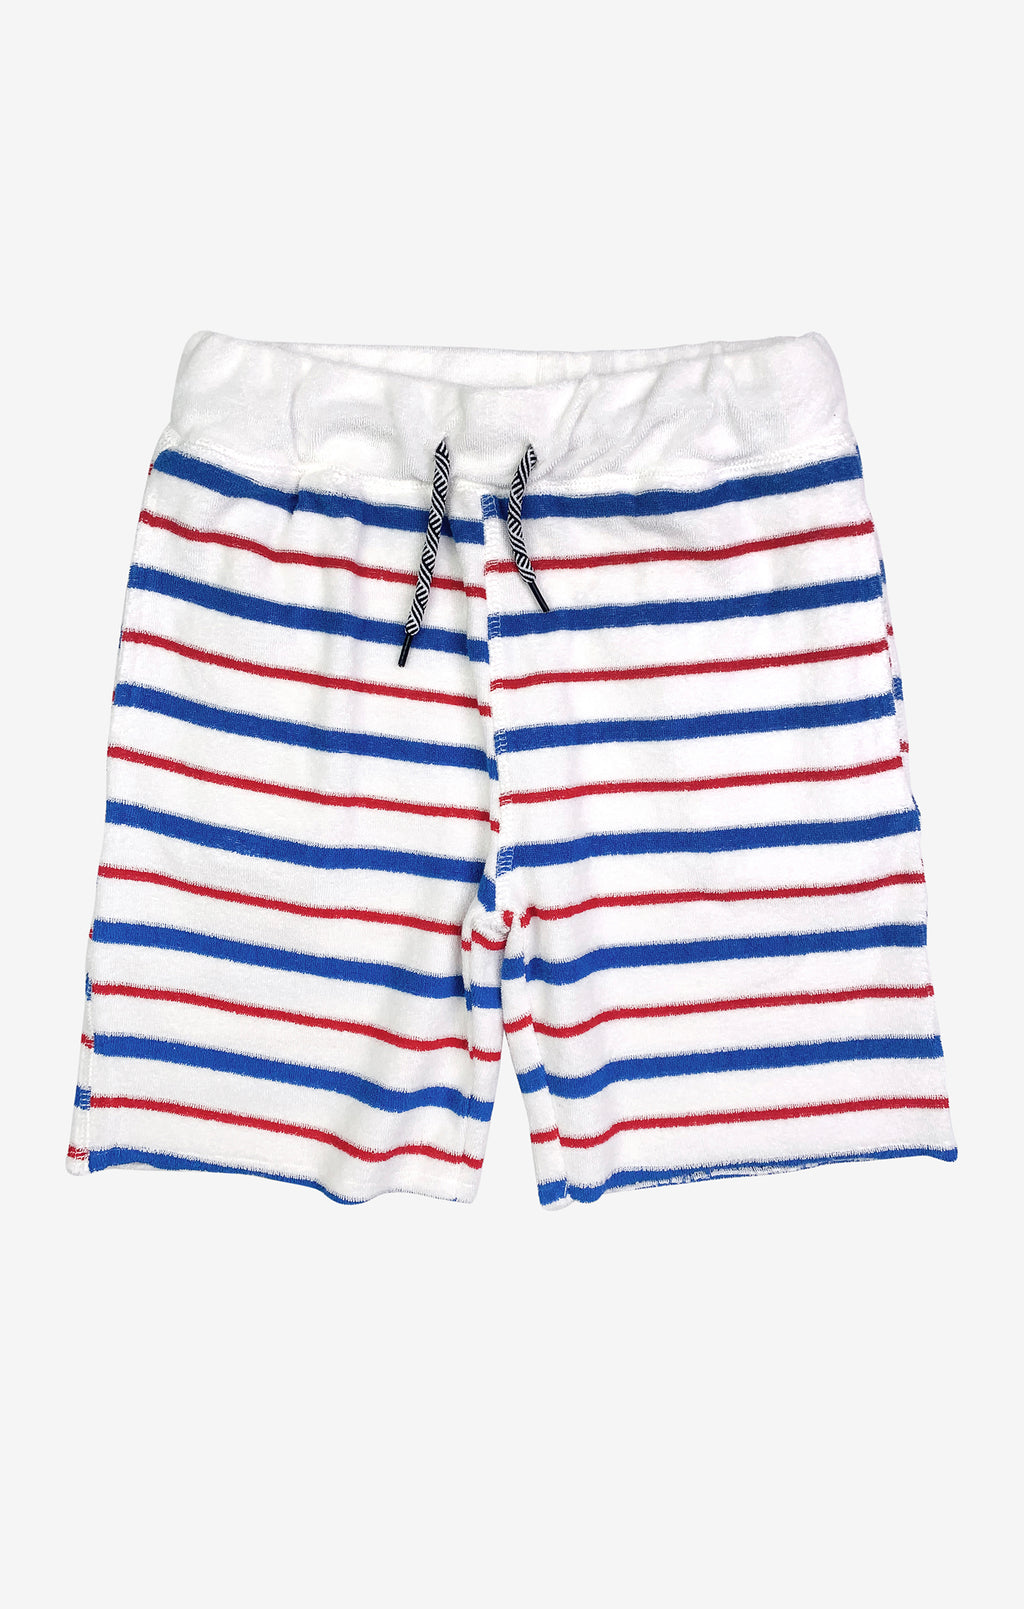 CAMP SHORTS - RED, WHITE & BLUE